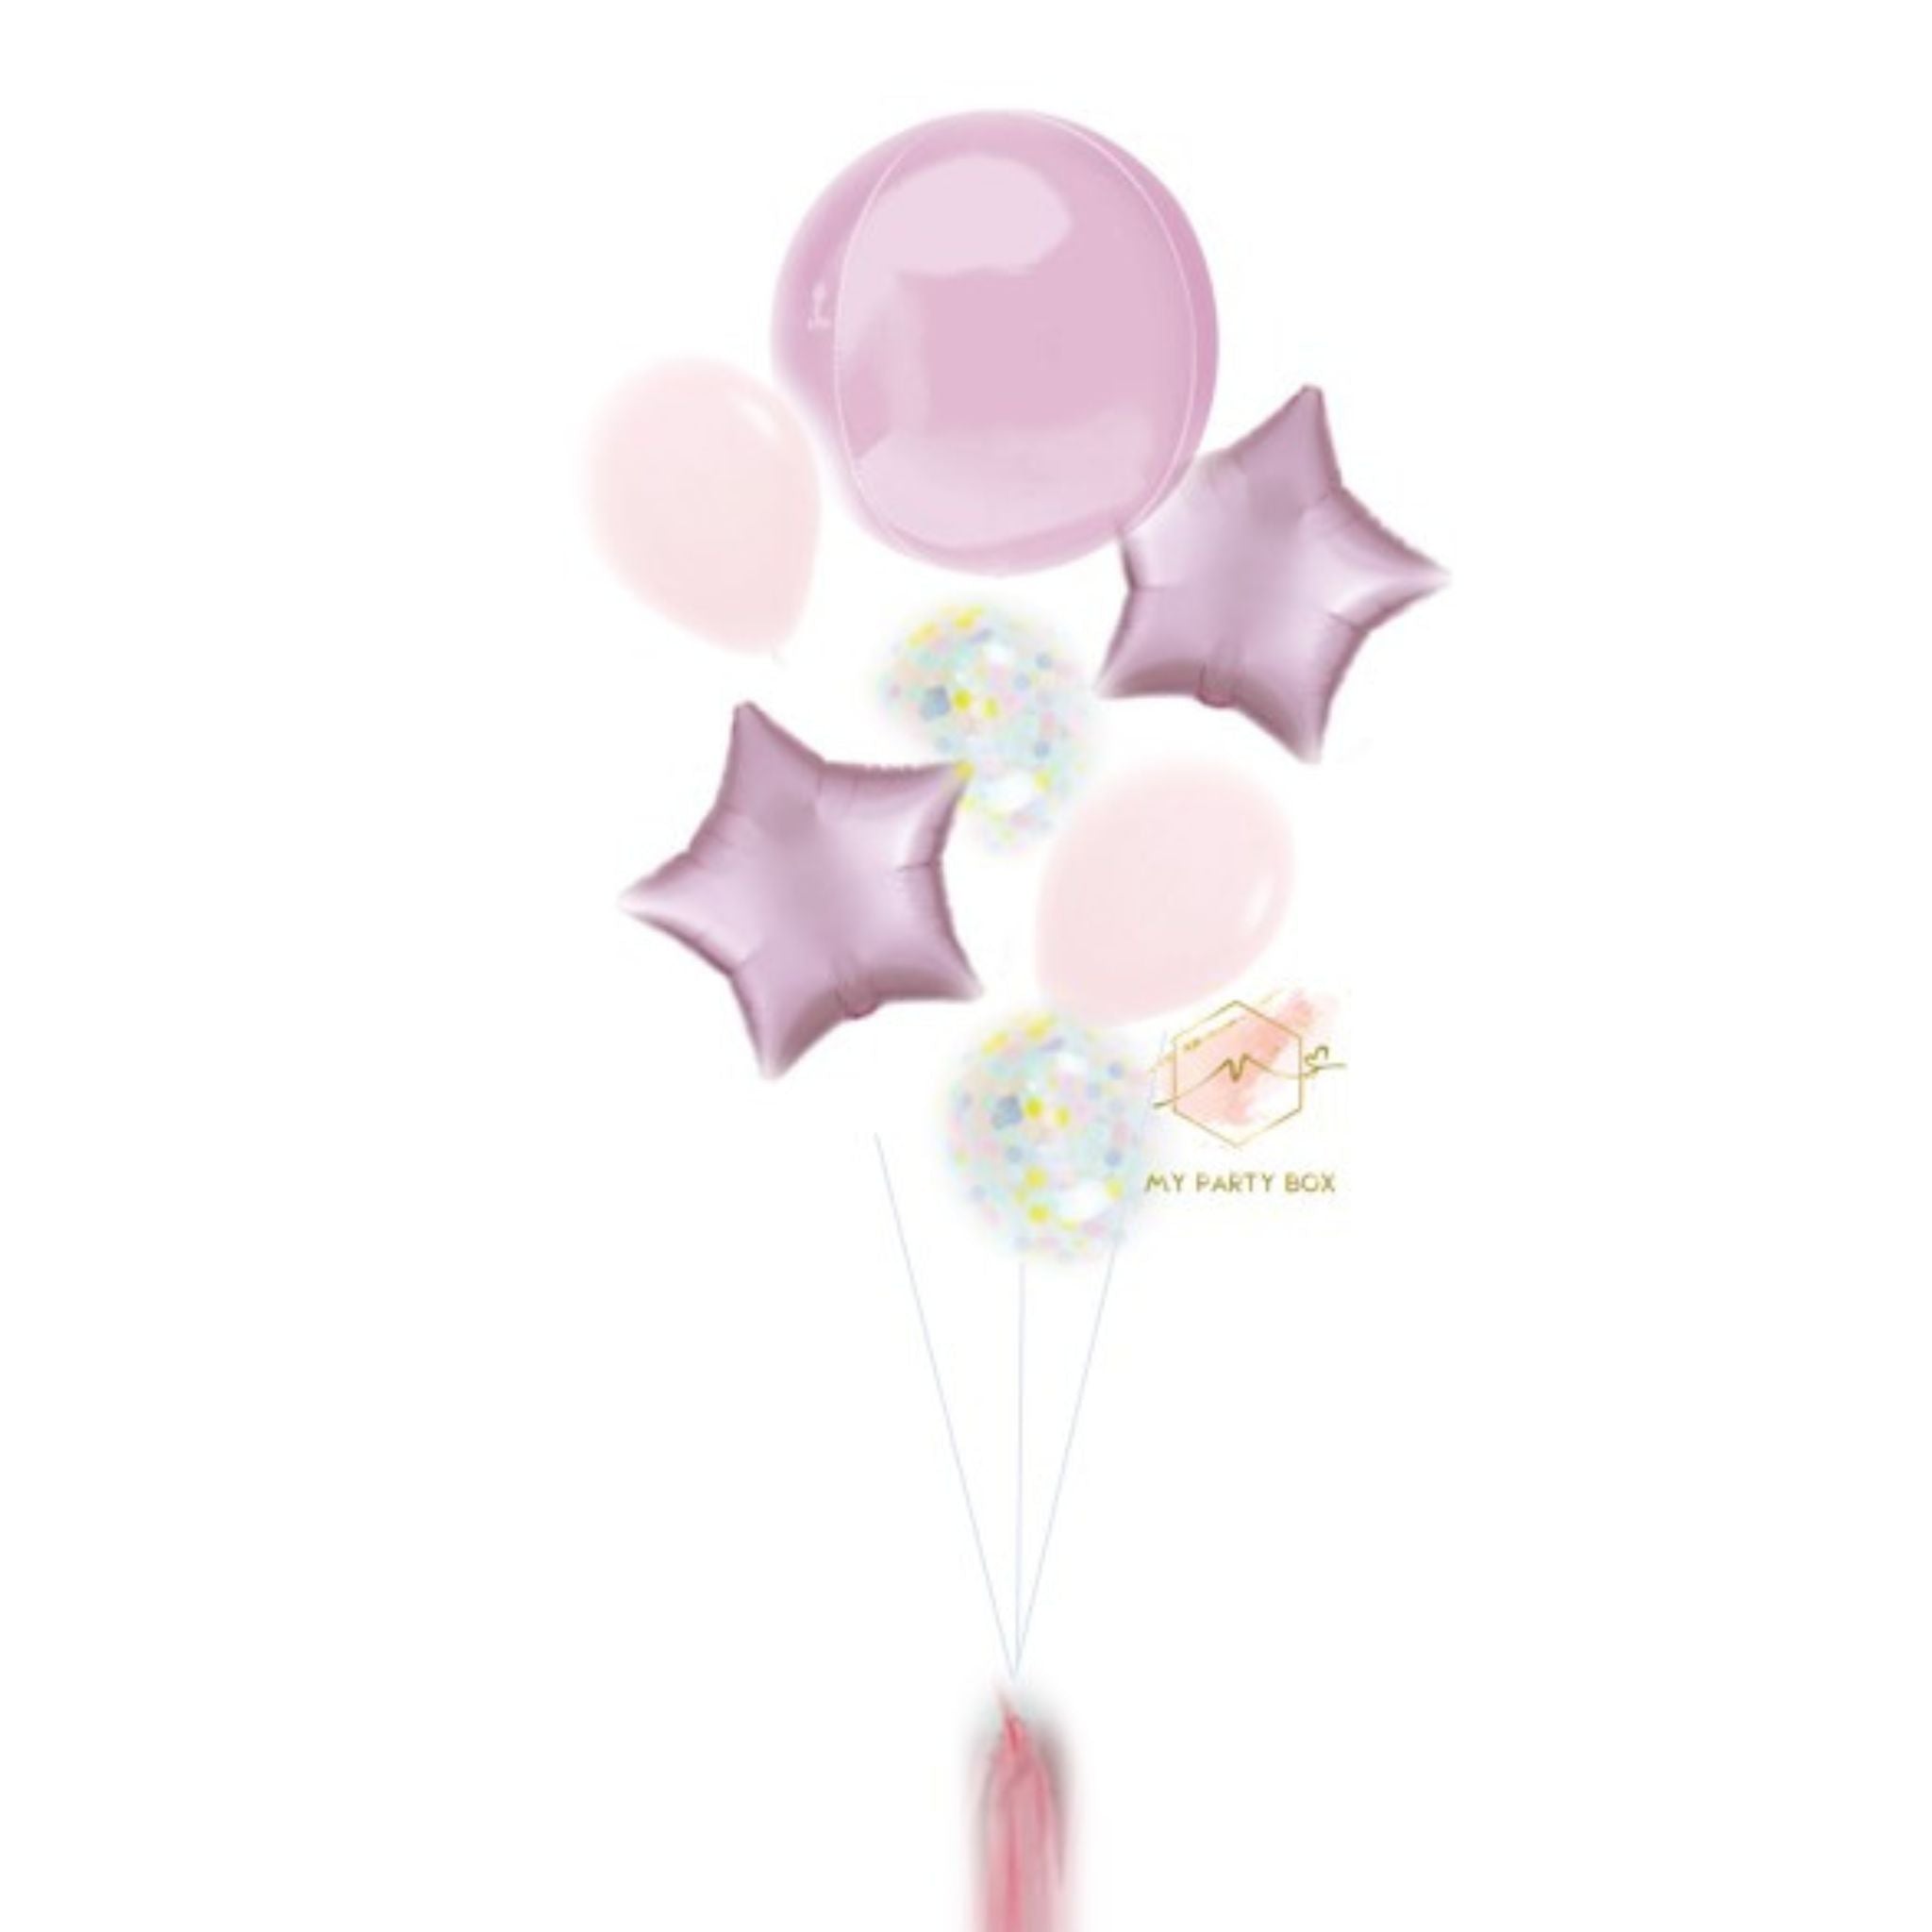 My Party Box Pastel Pink Deluxe Balloon Bouquet